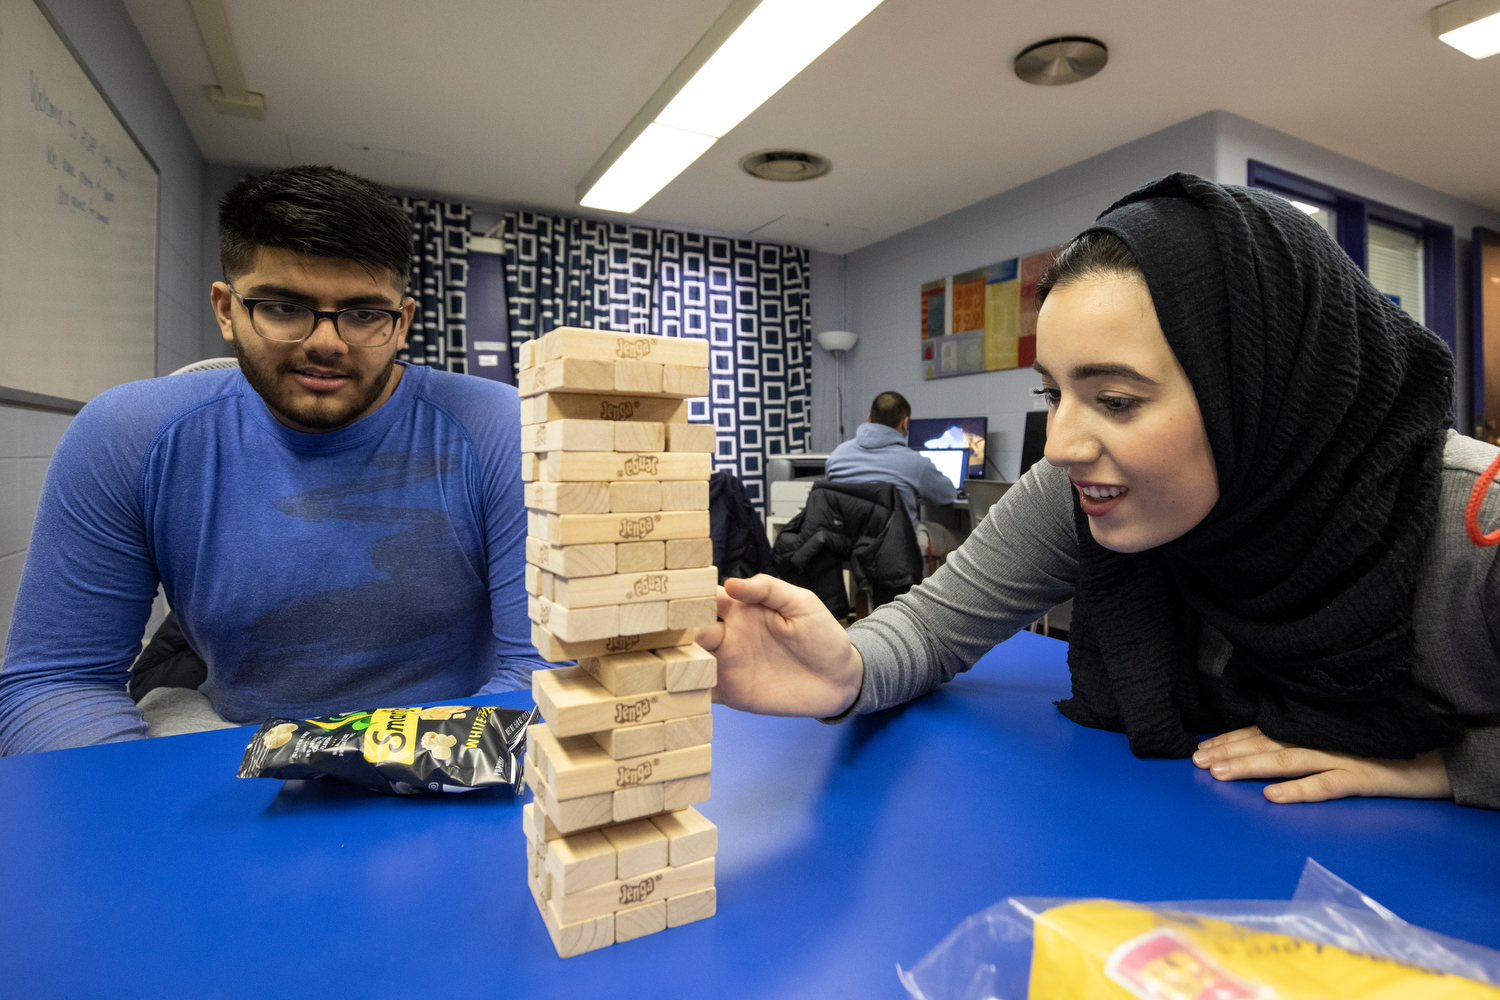 Tamara Jumah (LAS '22), right, plays Jenga with Zakee Jabbar (LAS '20) during AHS Academic Support and Achievement Program's open house in the Physical Education Building.